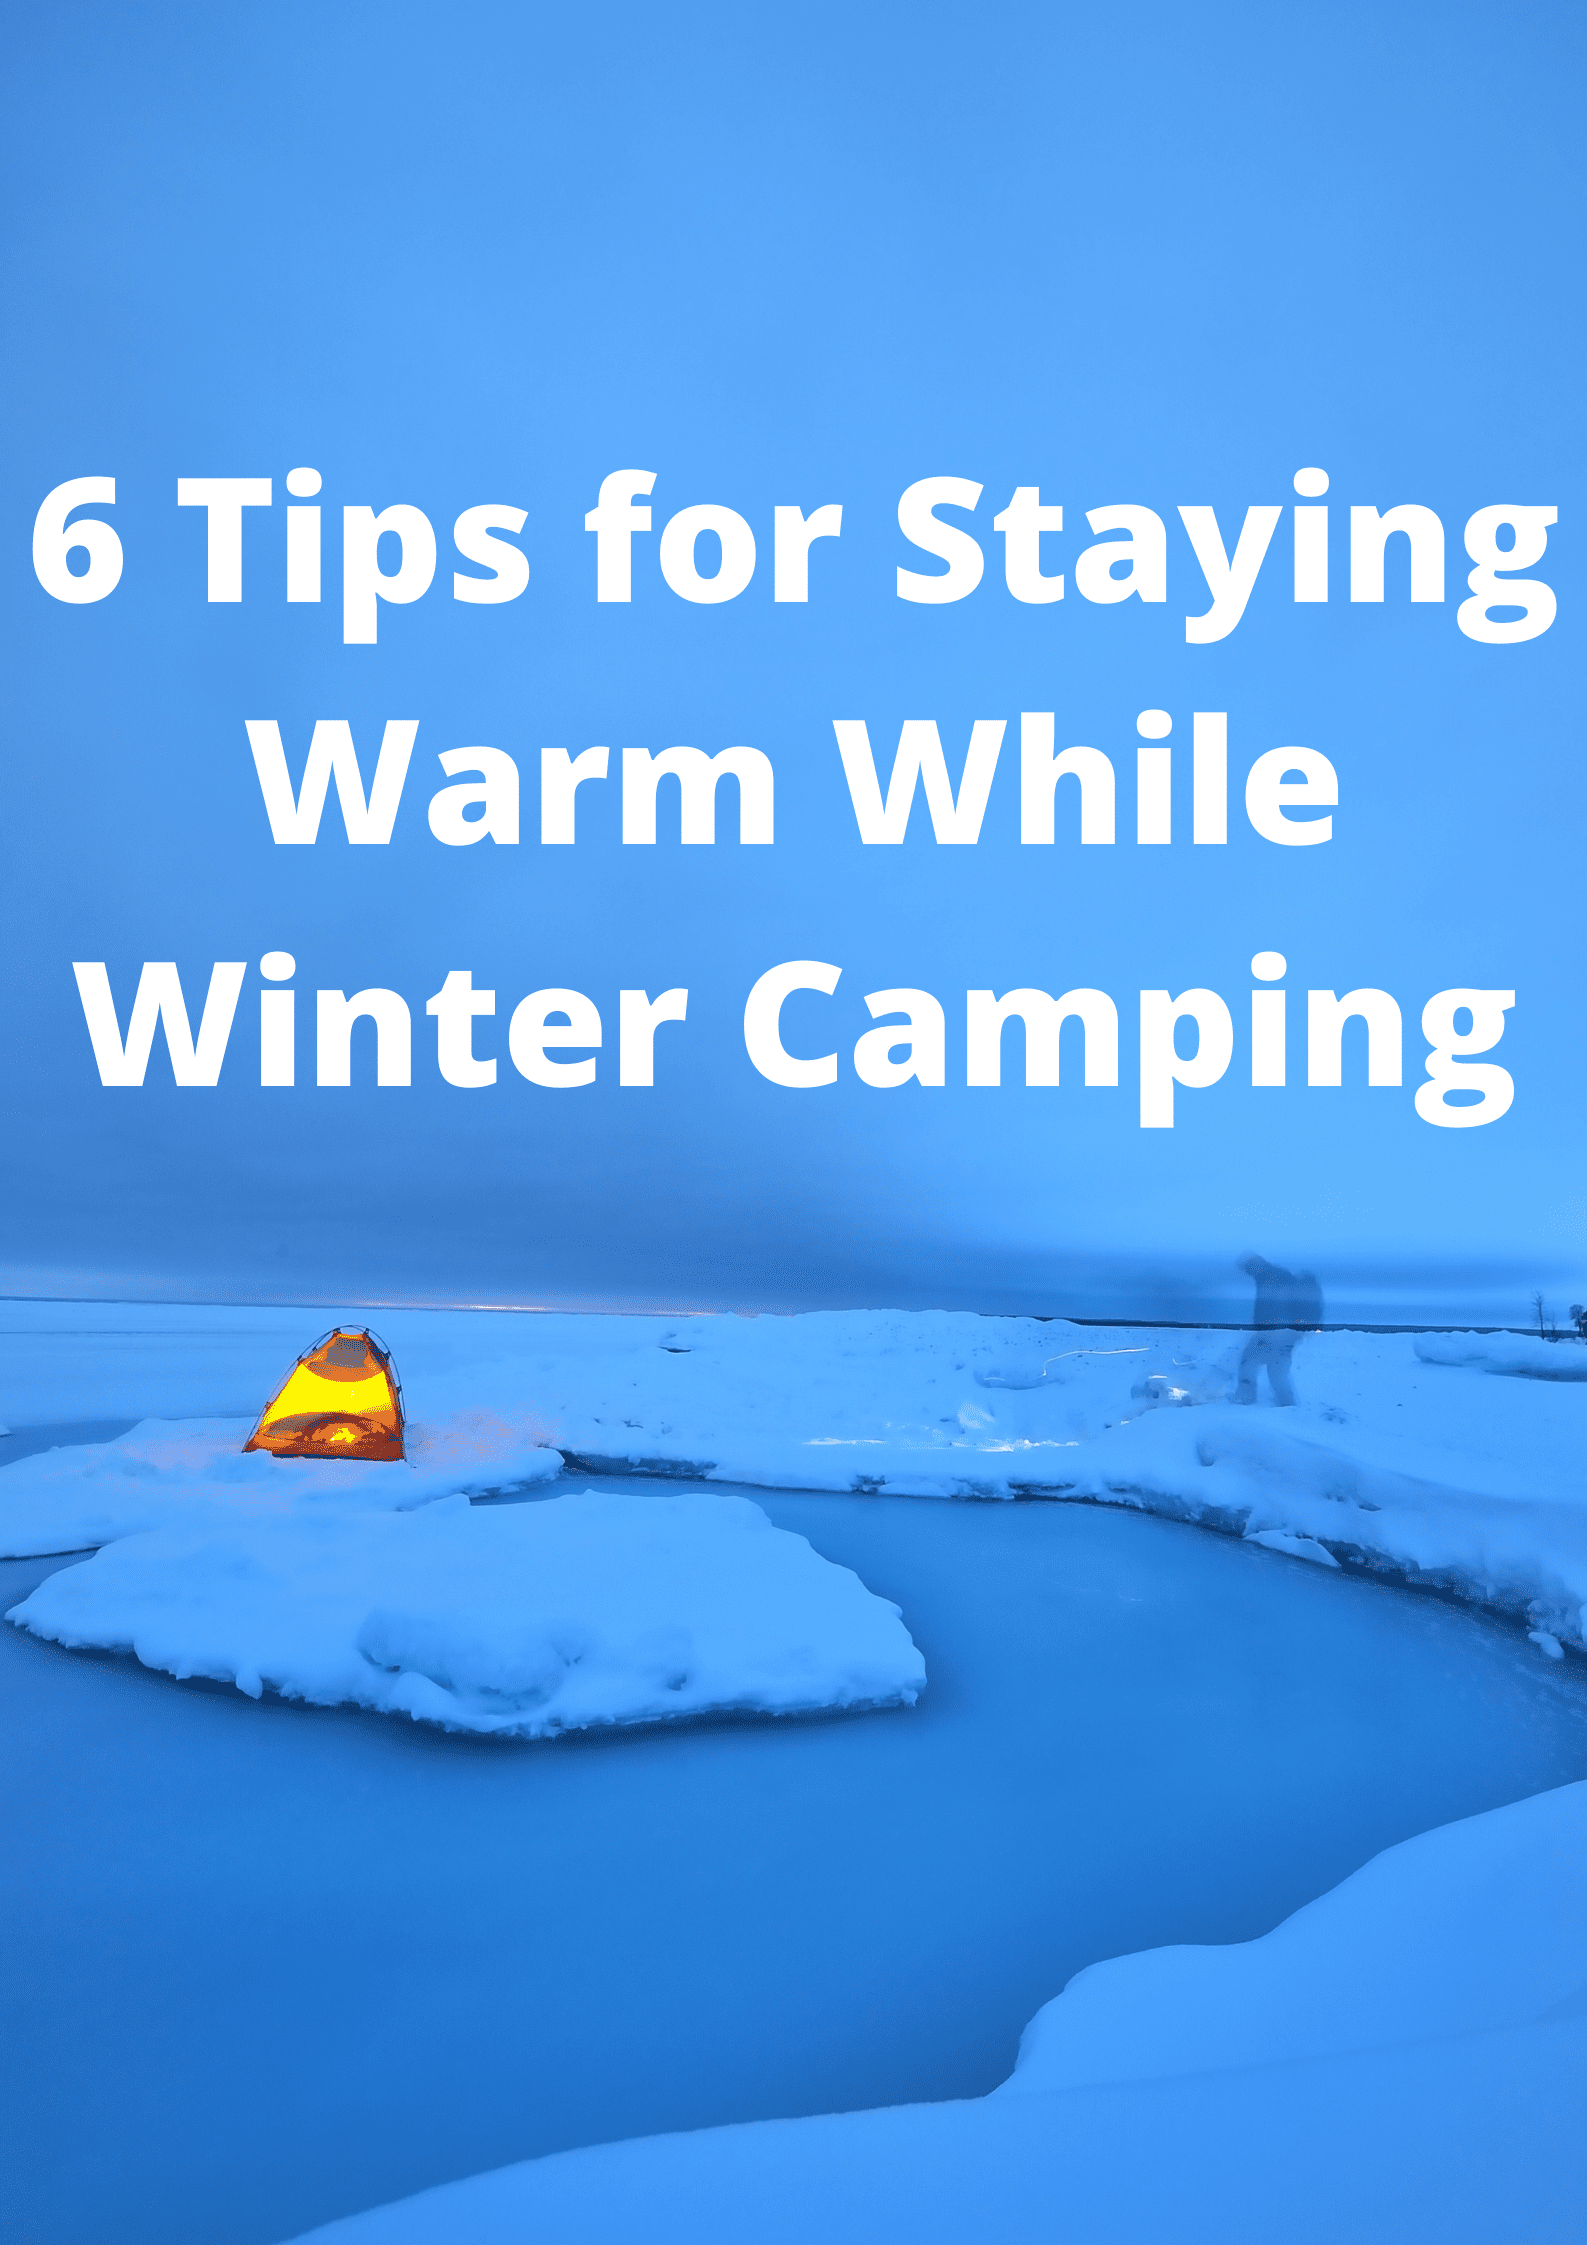 6 Tips for Staying Warm While Winter Camping